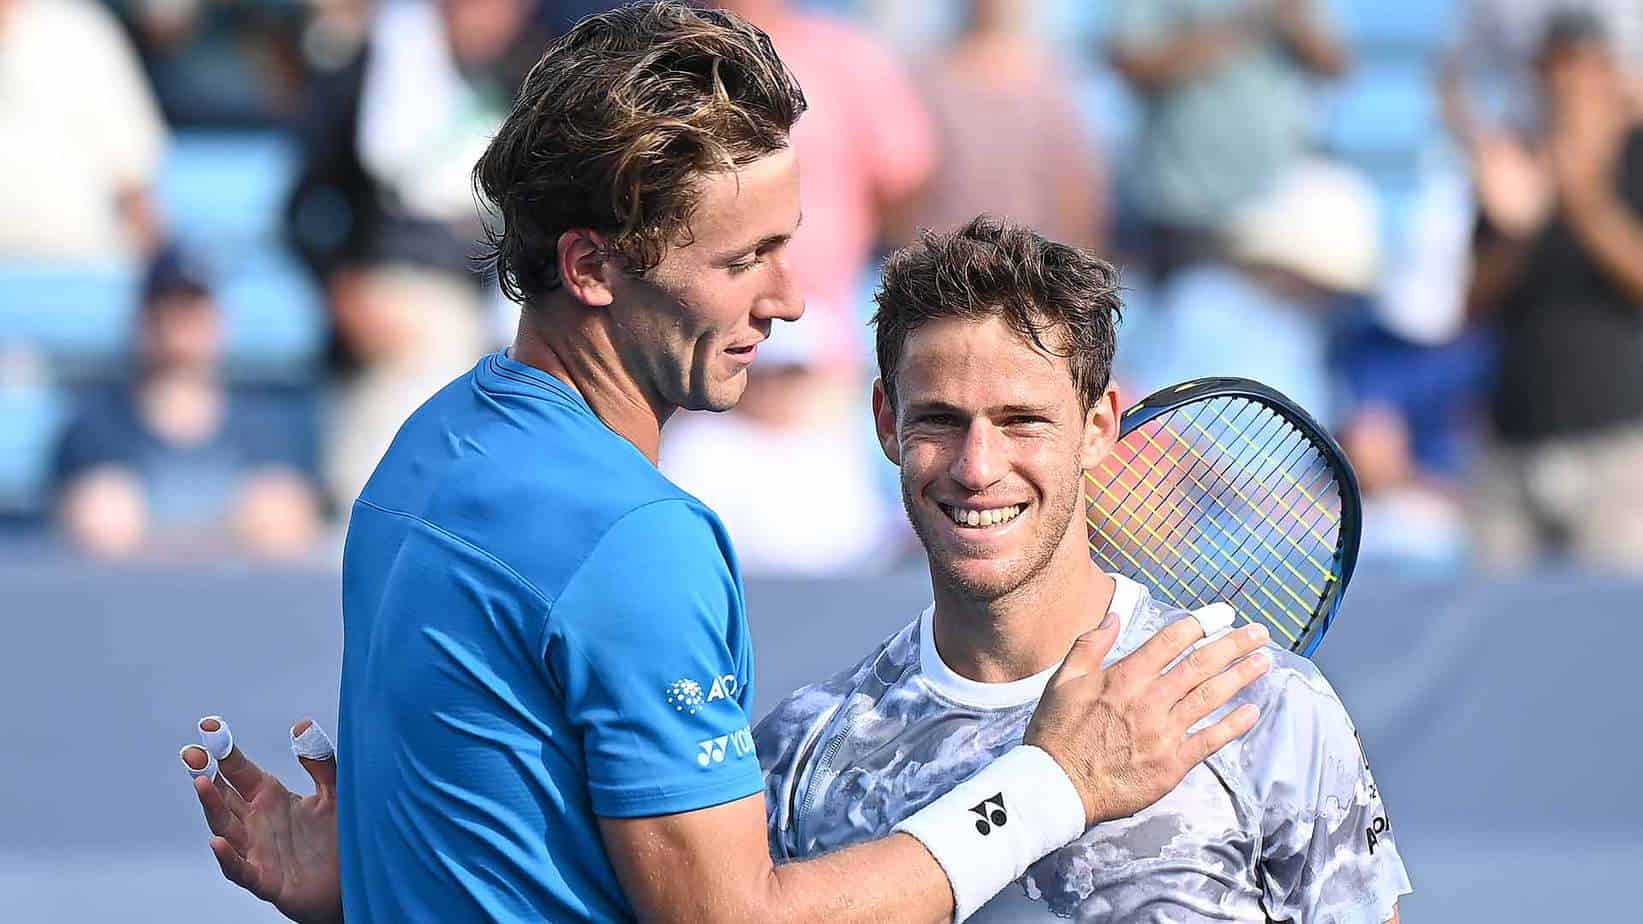 Miami Open: Men’s Quarterfinals – Betting odds and Free Picks